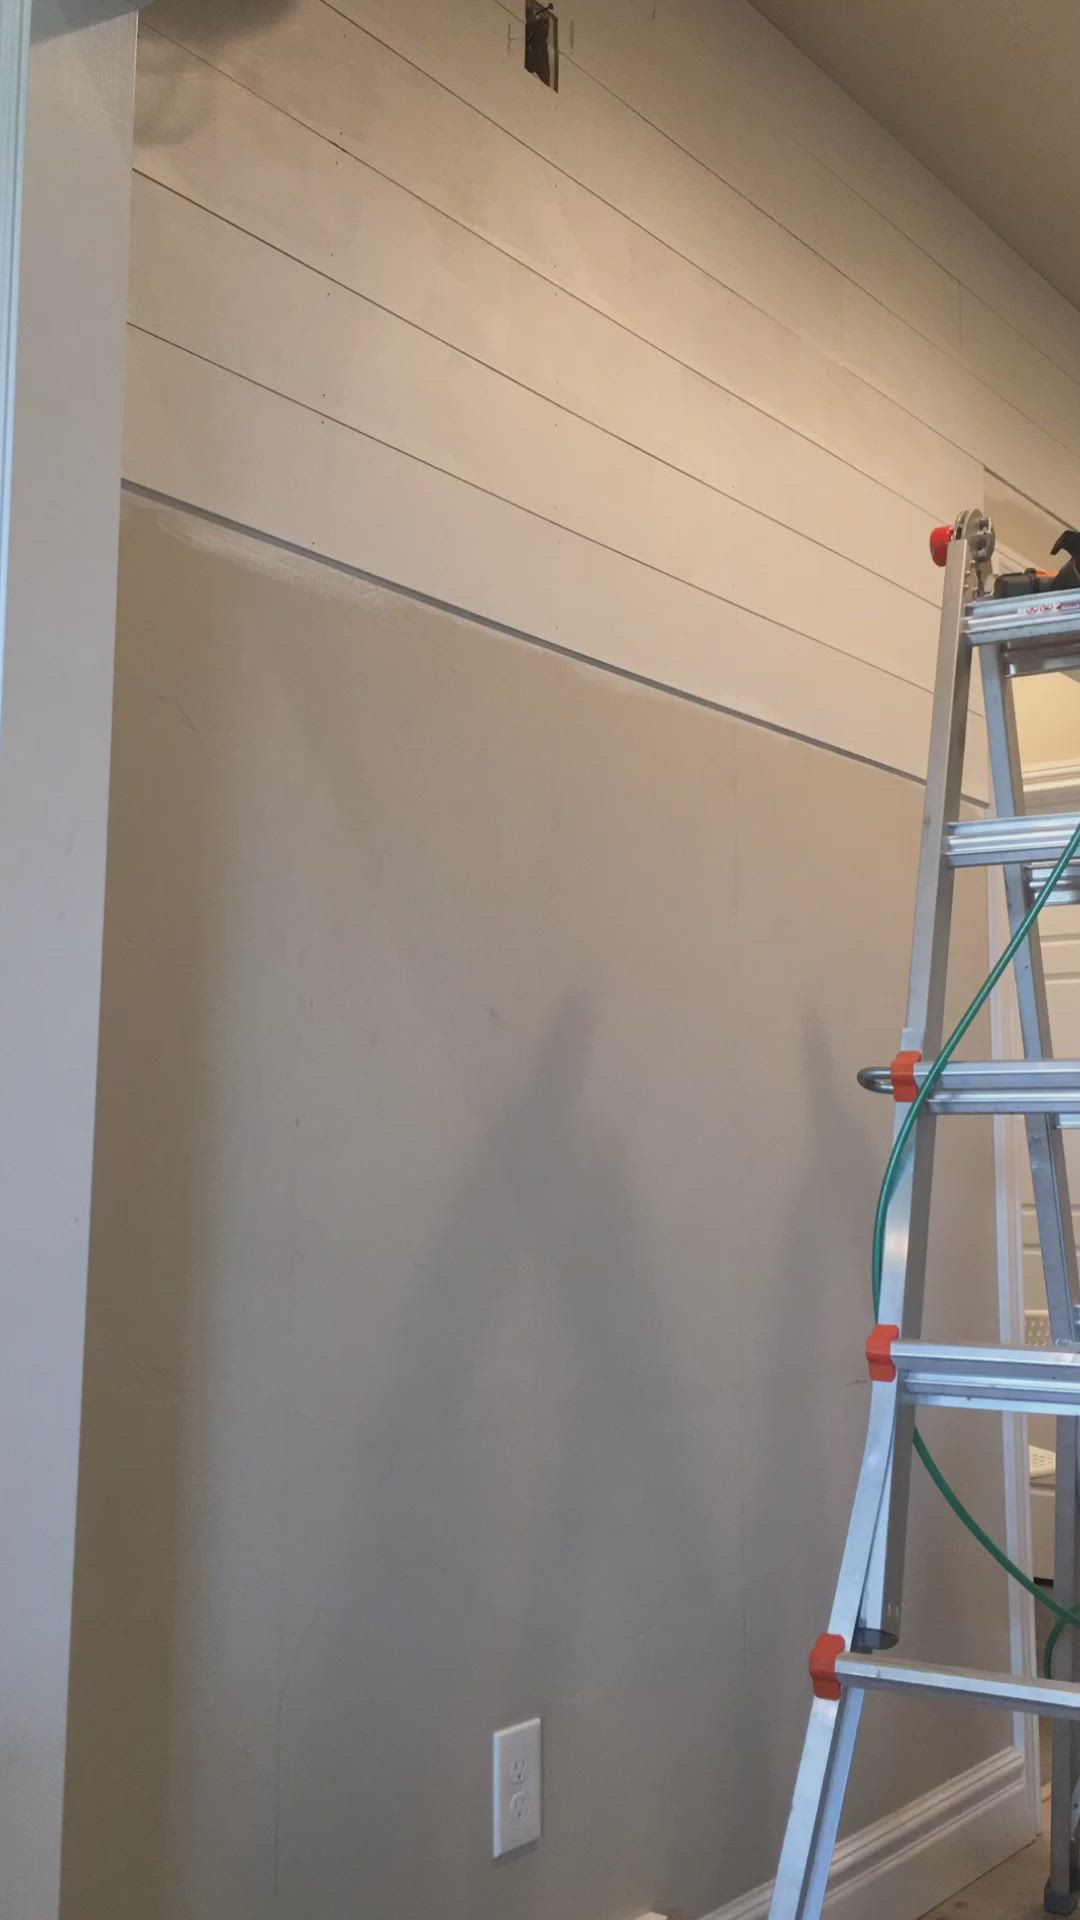 This may contain: two people on a ladder painting the walls in a room that is being painted white